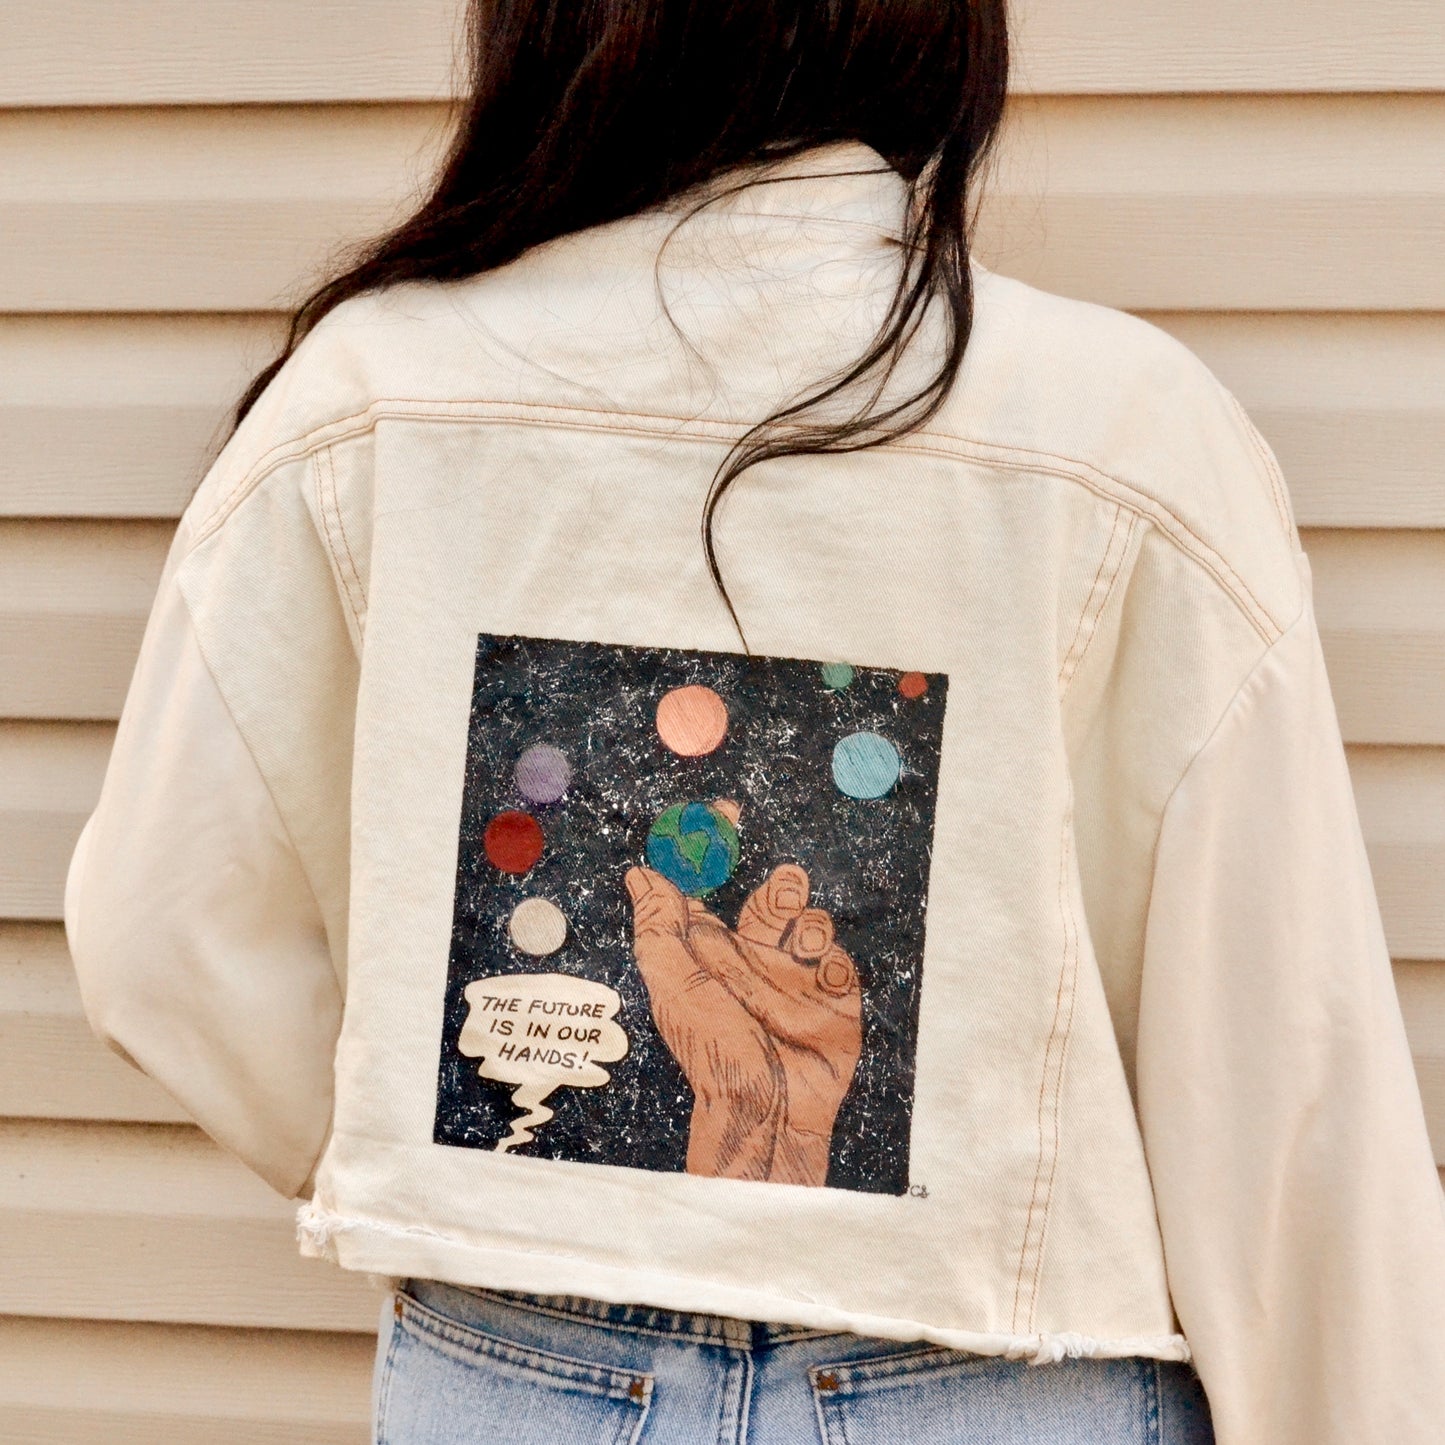 "The Future is in Our Hands" Jacket